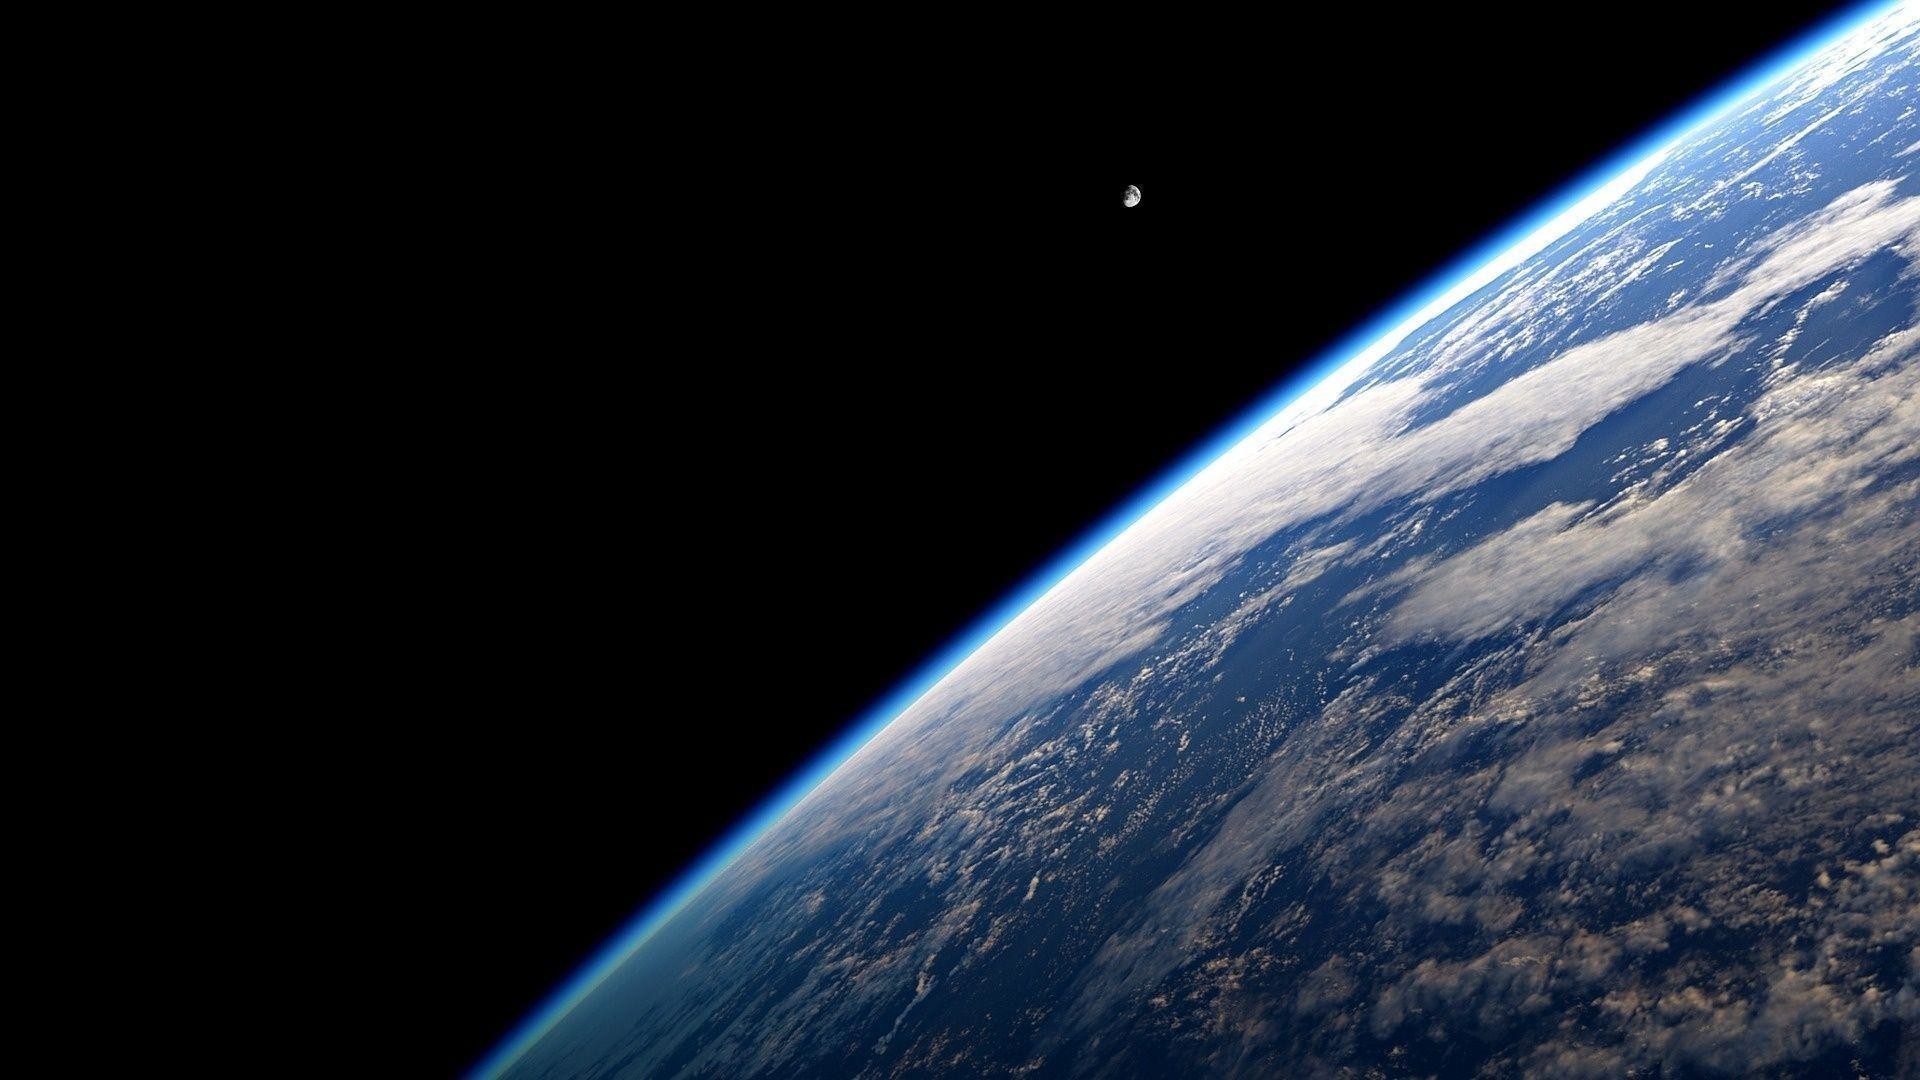 earth from space wallpaper real hd 1080p | SmaData.com